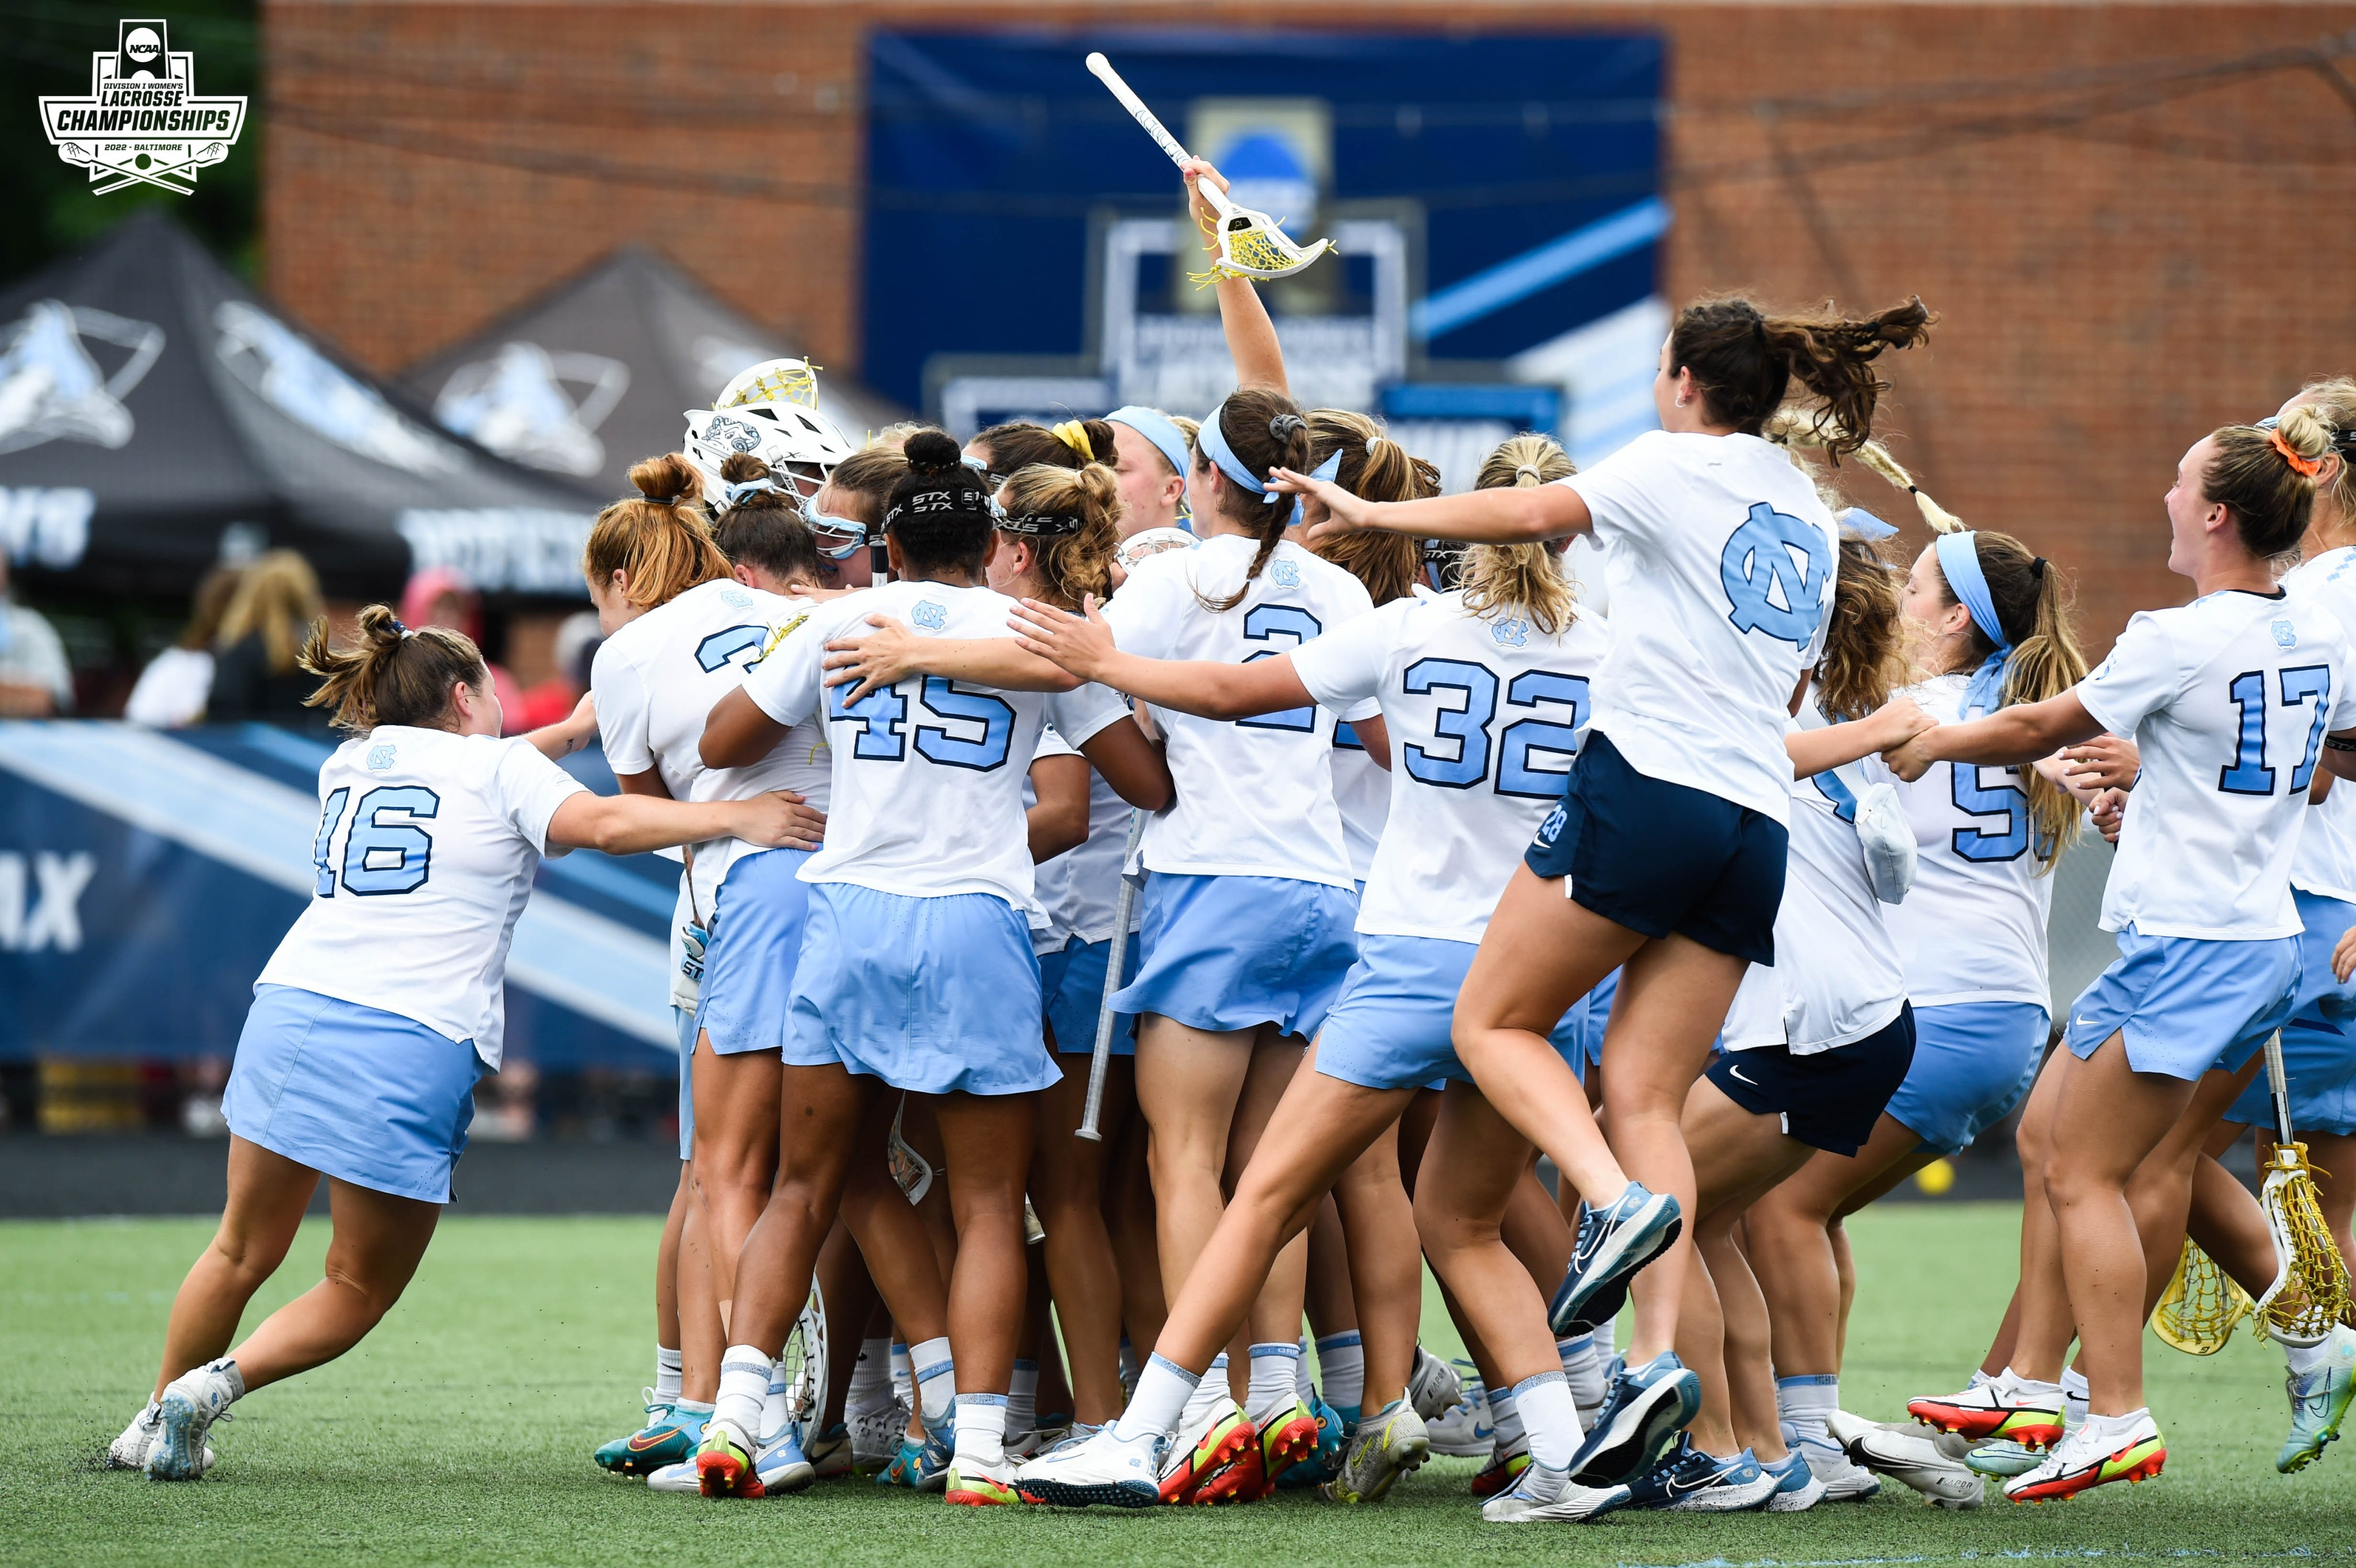 Highlight: North Carolina's Sam Geirsbach scores to put UNC up 15-14 with 1:03 to play in National Semifinal v. Northwestern